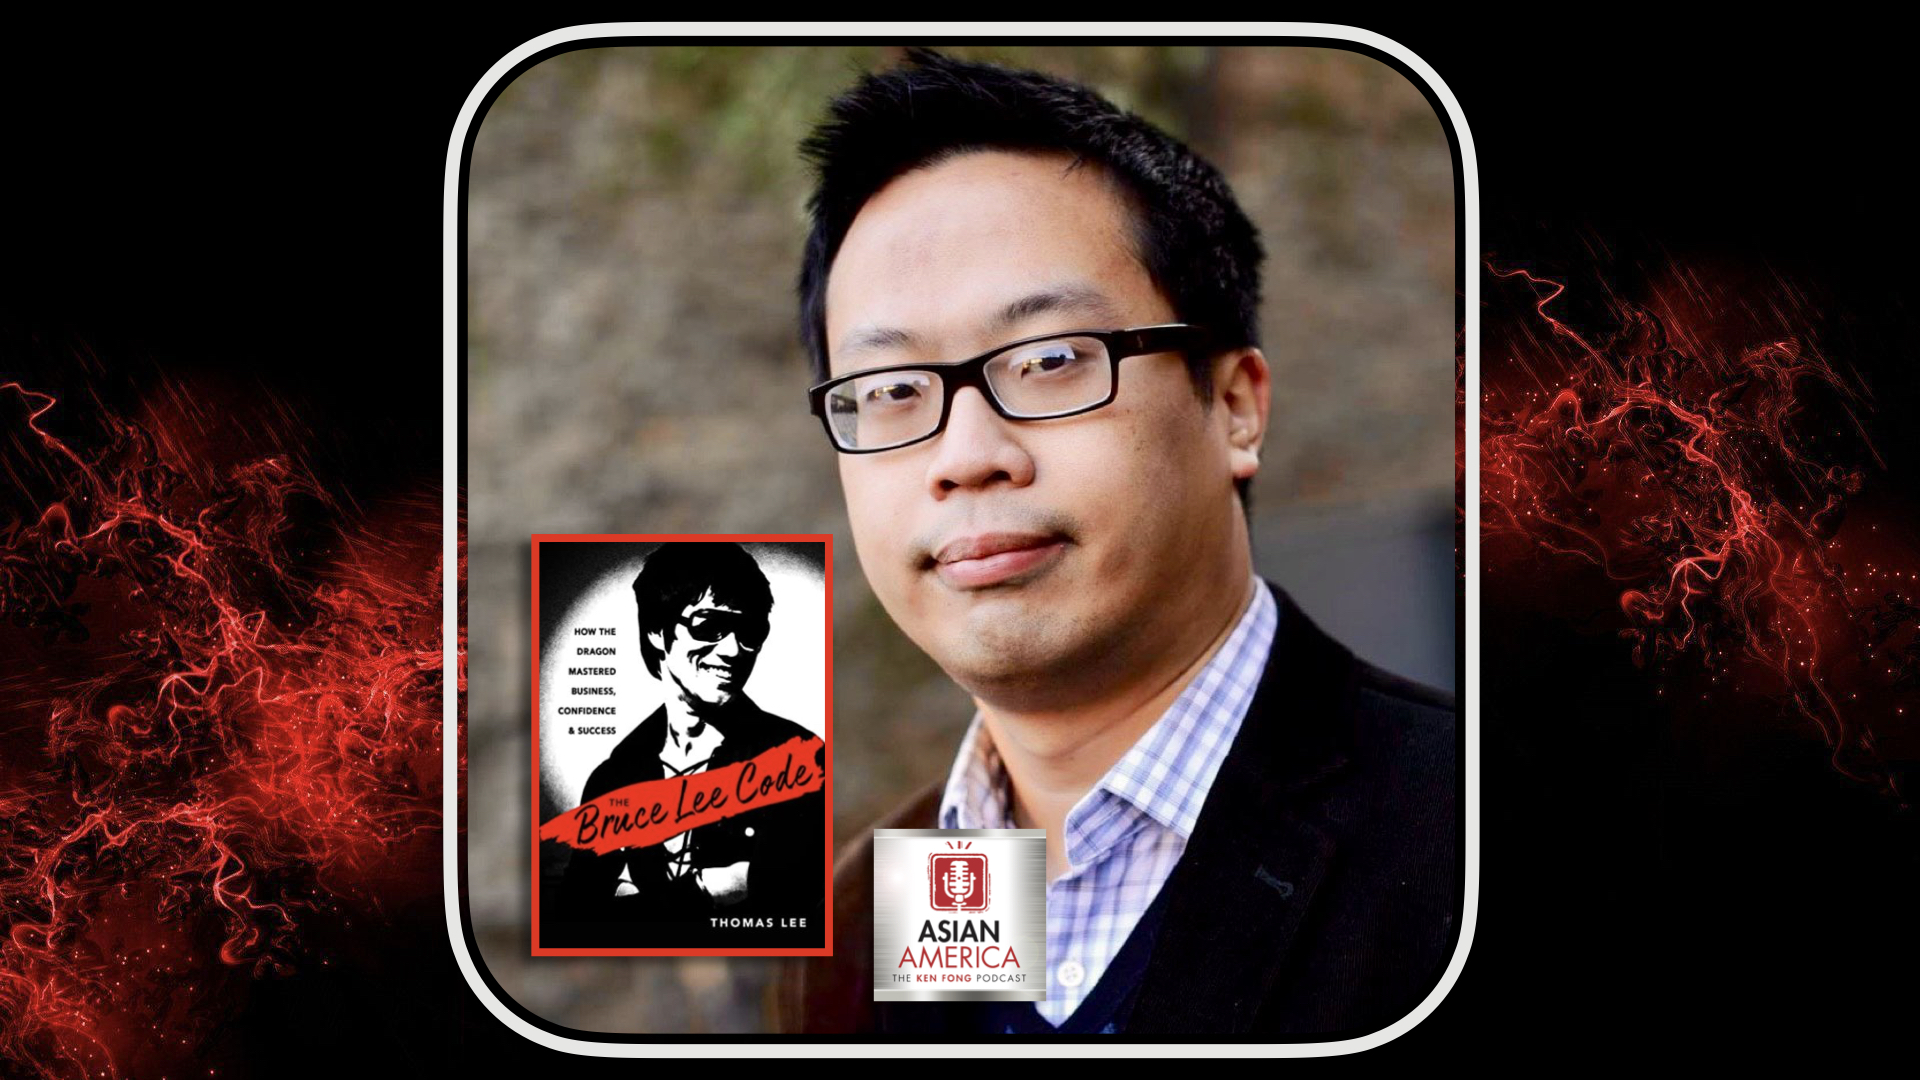 EP 474: Thomas Lee On How Bruce Lee Mastered Business, Confidence & Success